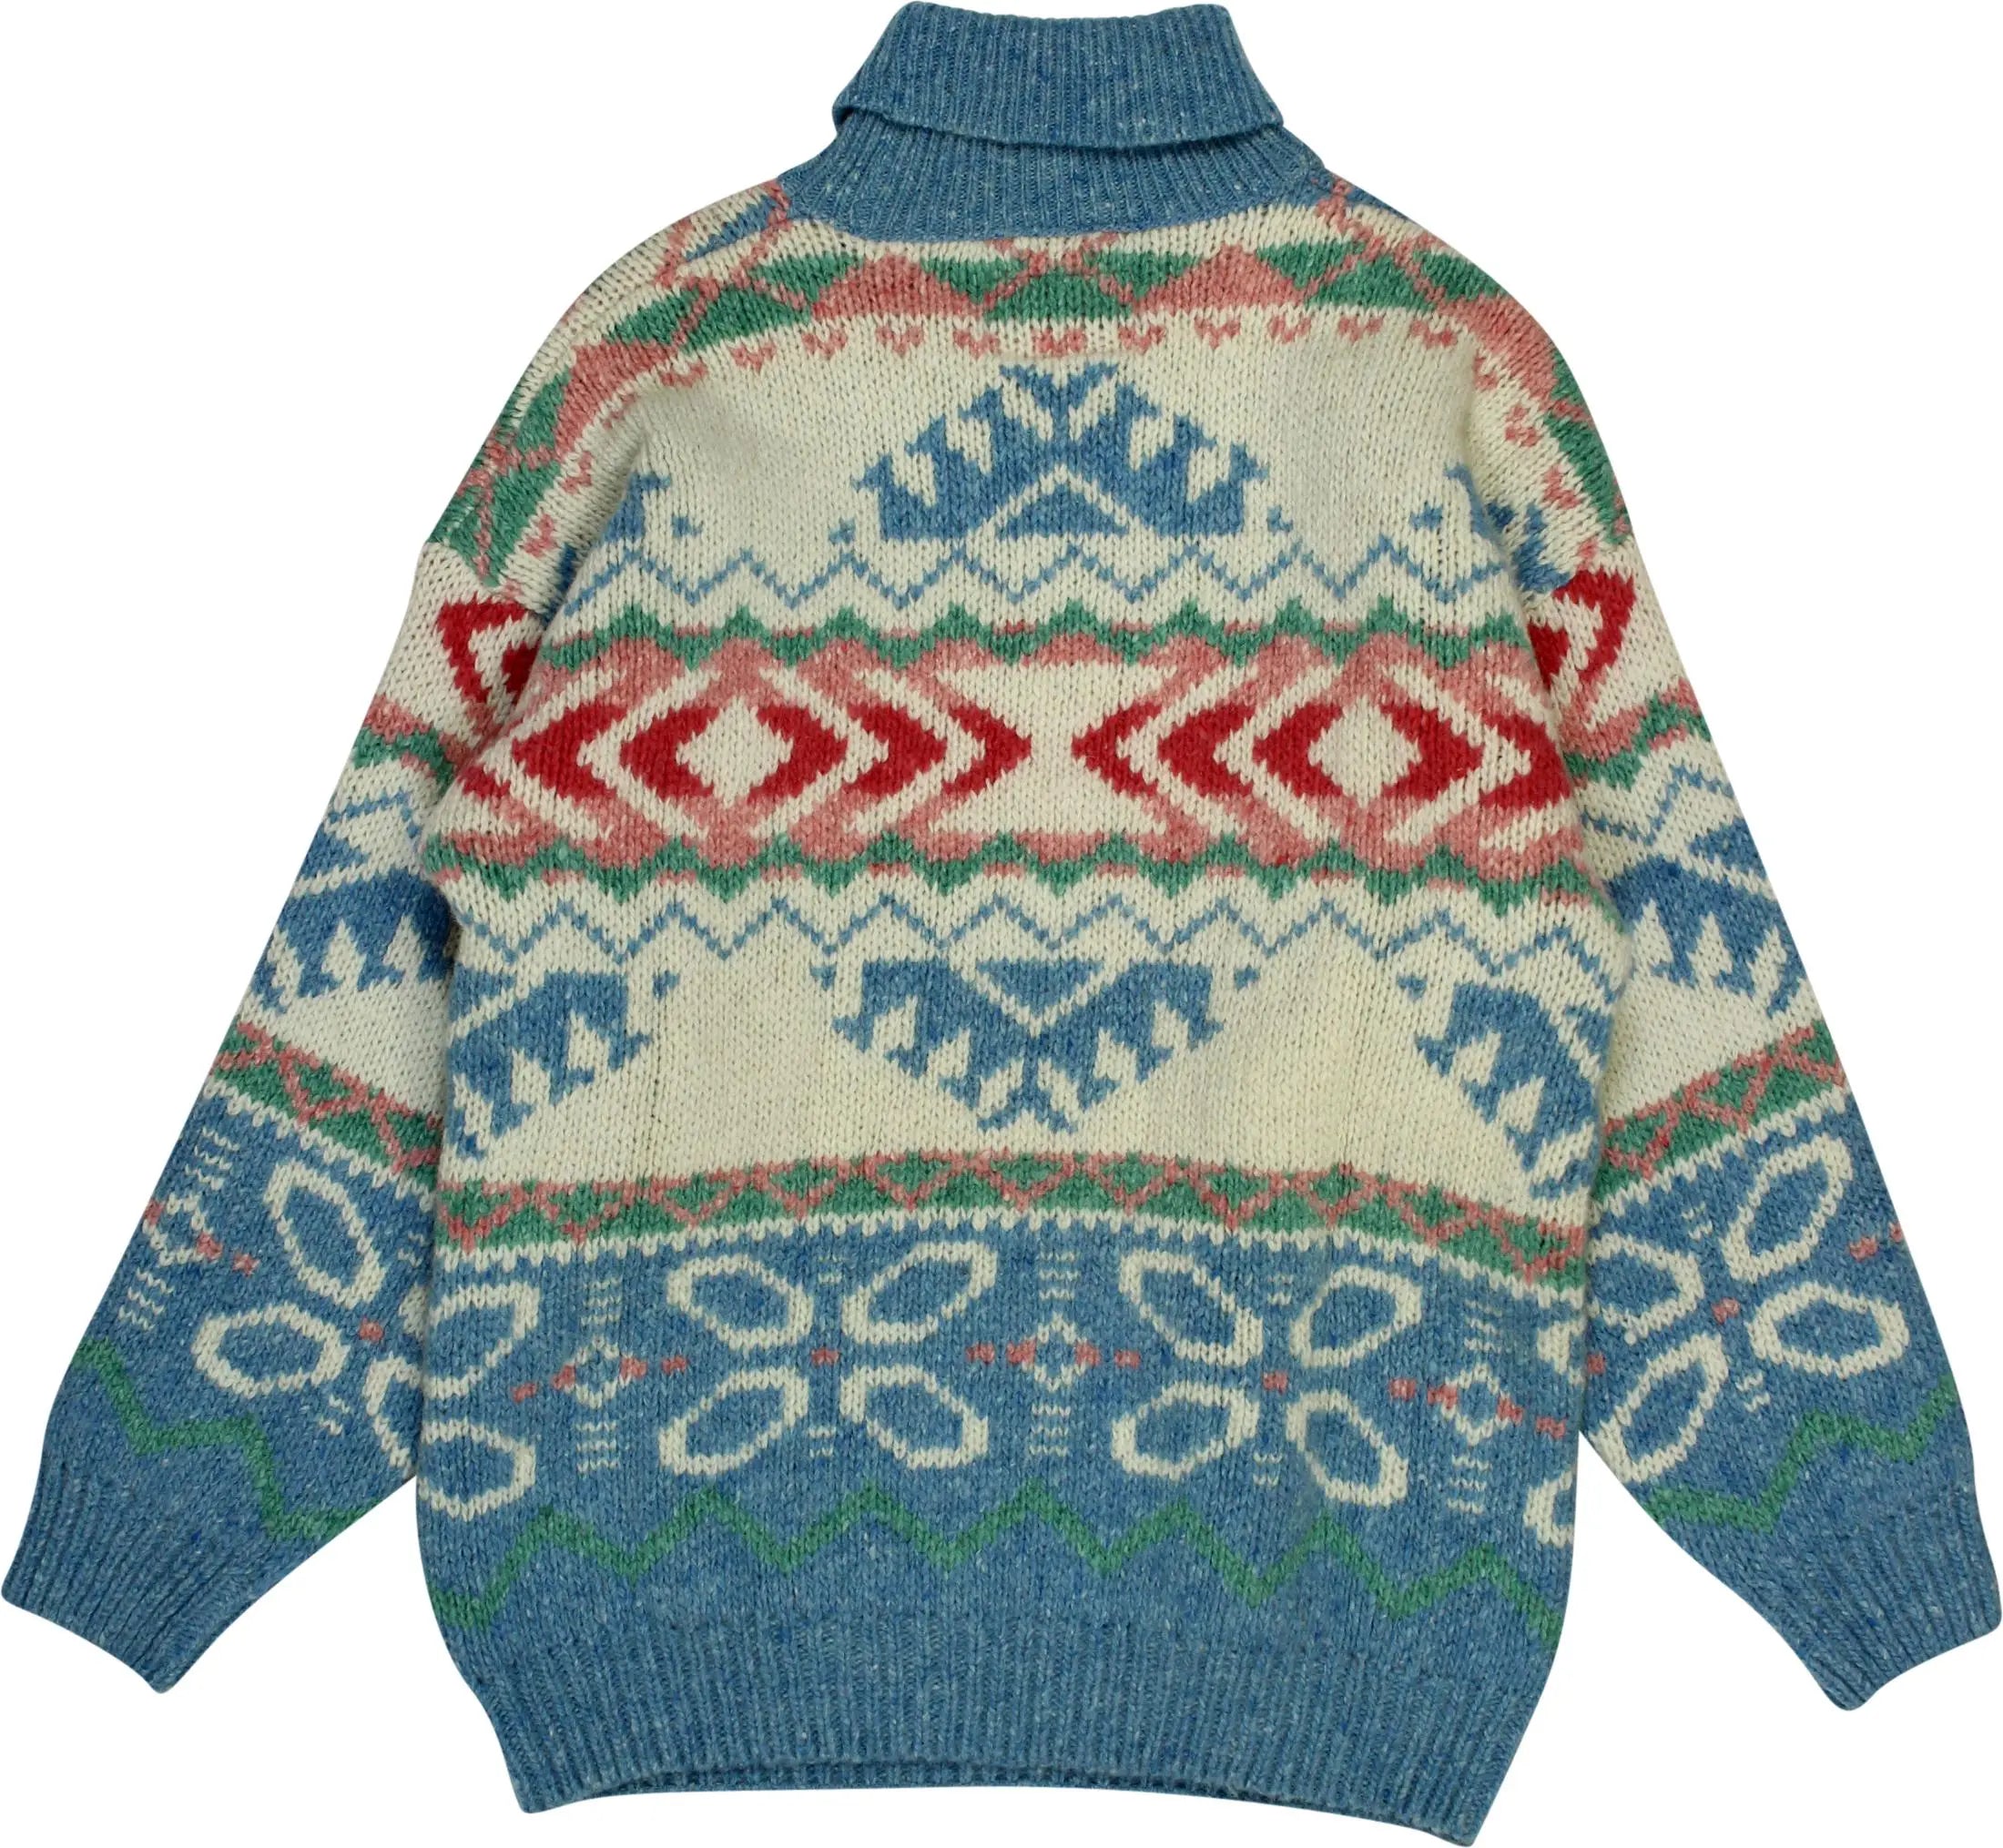 Unknown - Colourful Wool Knitted Jumper- ThriftTale.com - Vintage and second handclothing